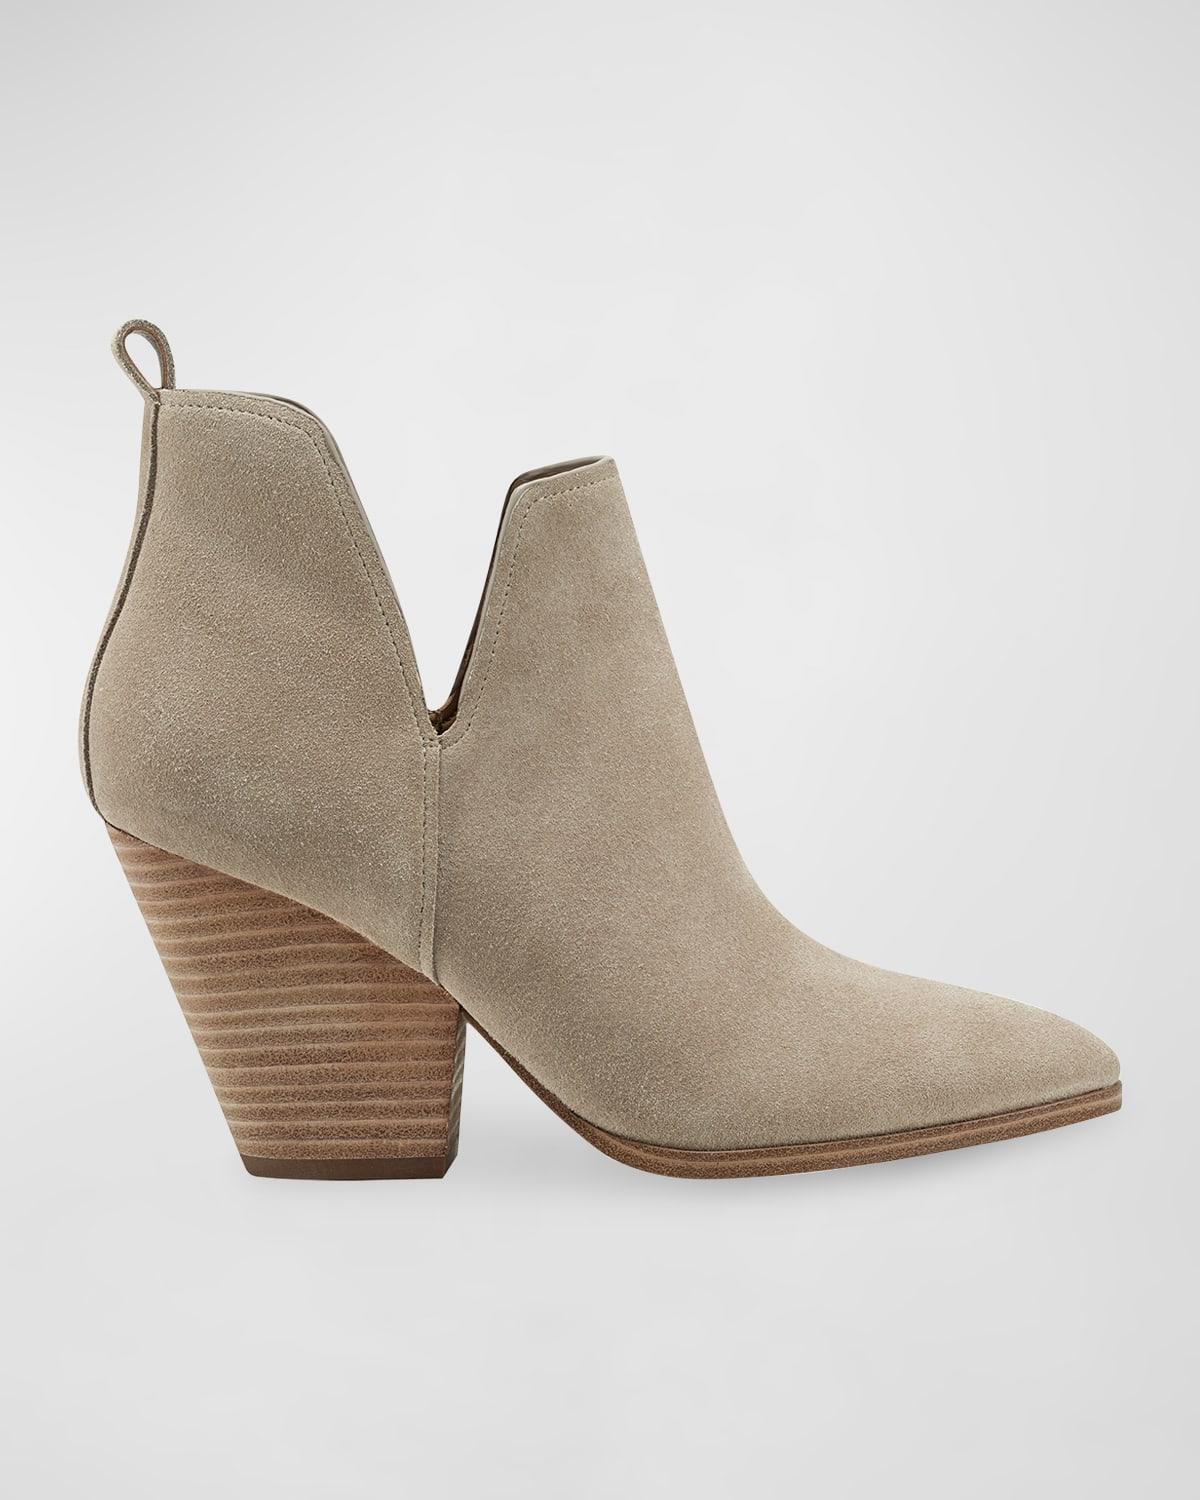 Marc Fisher LTD Tanilla Cutout Bootie Product Image